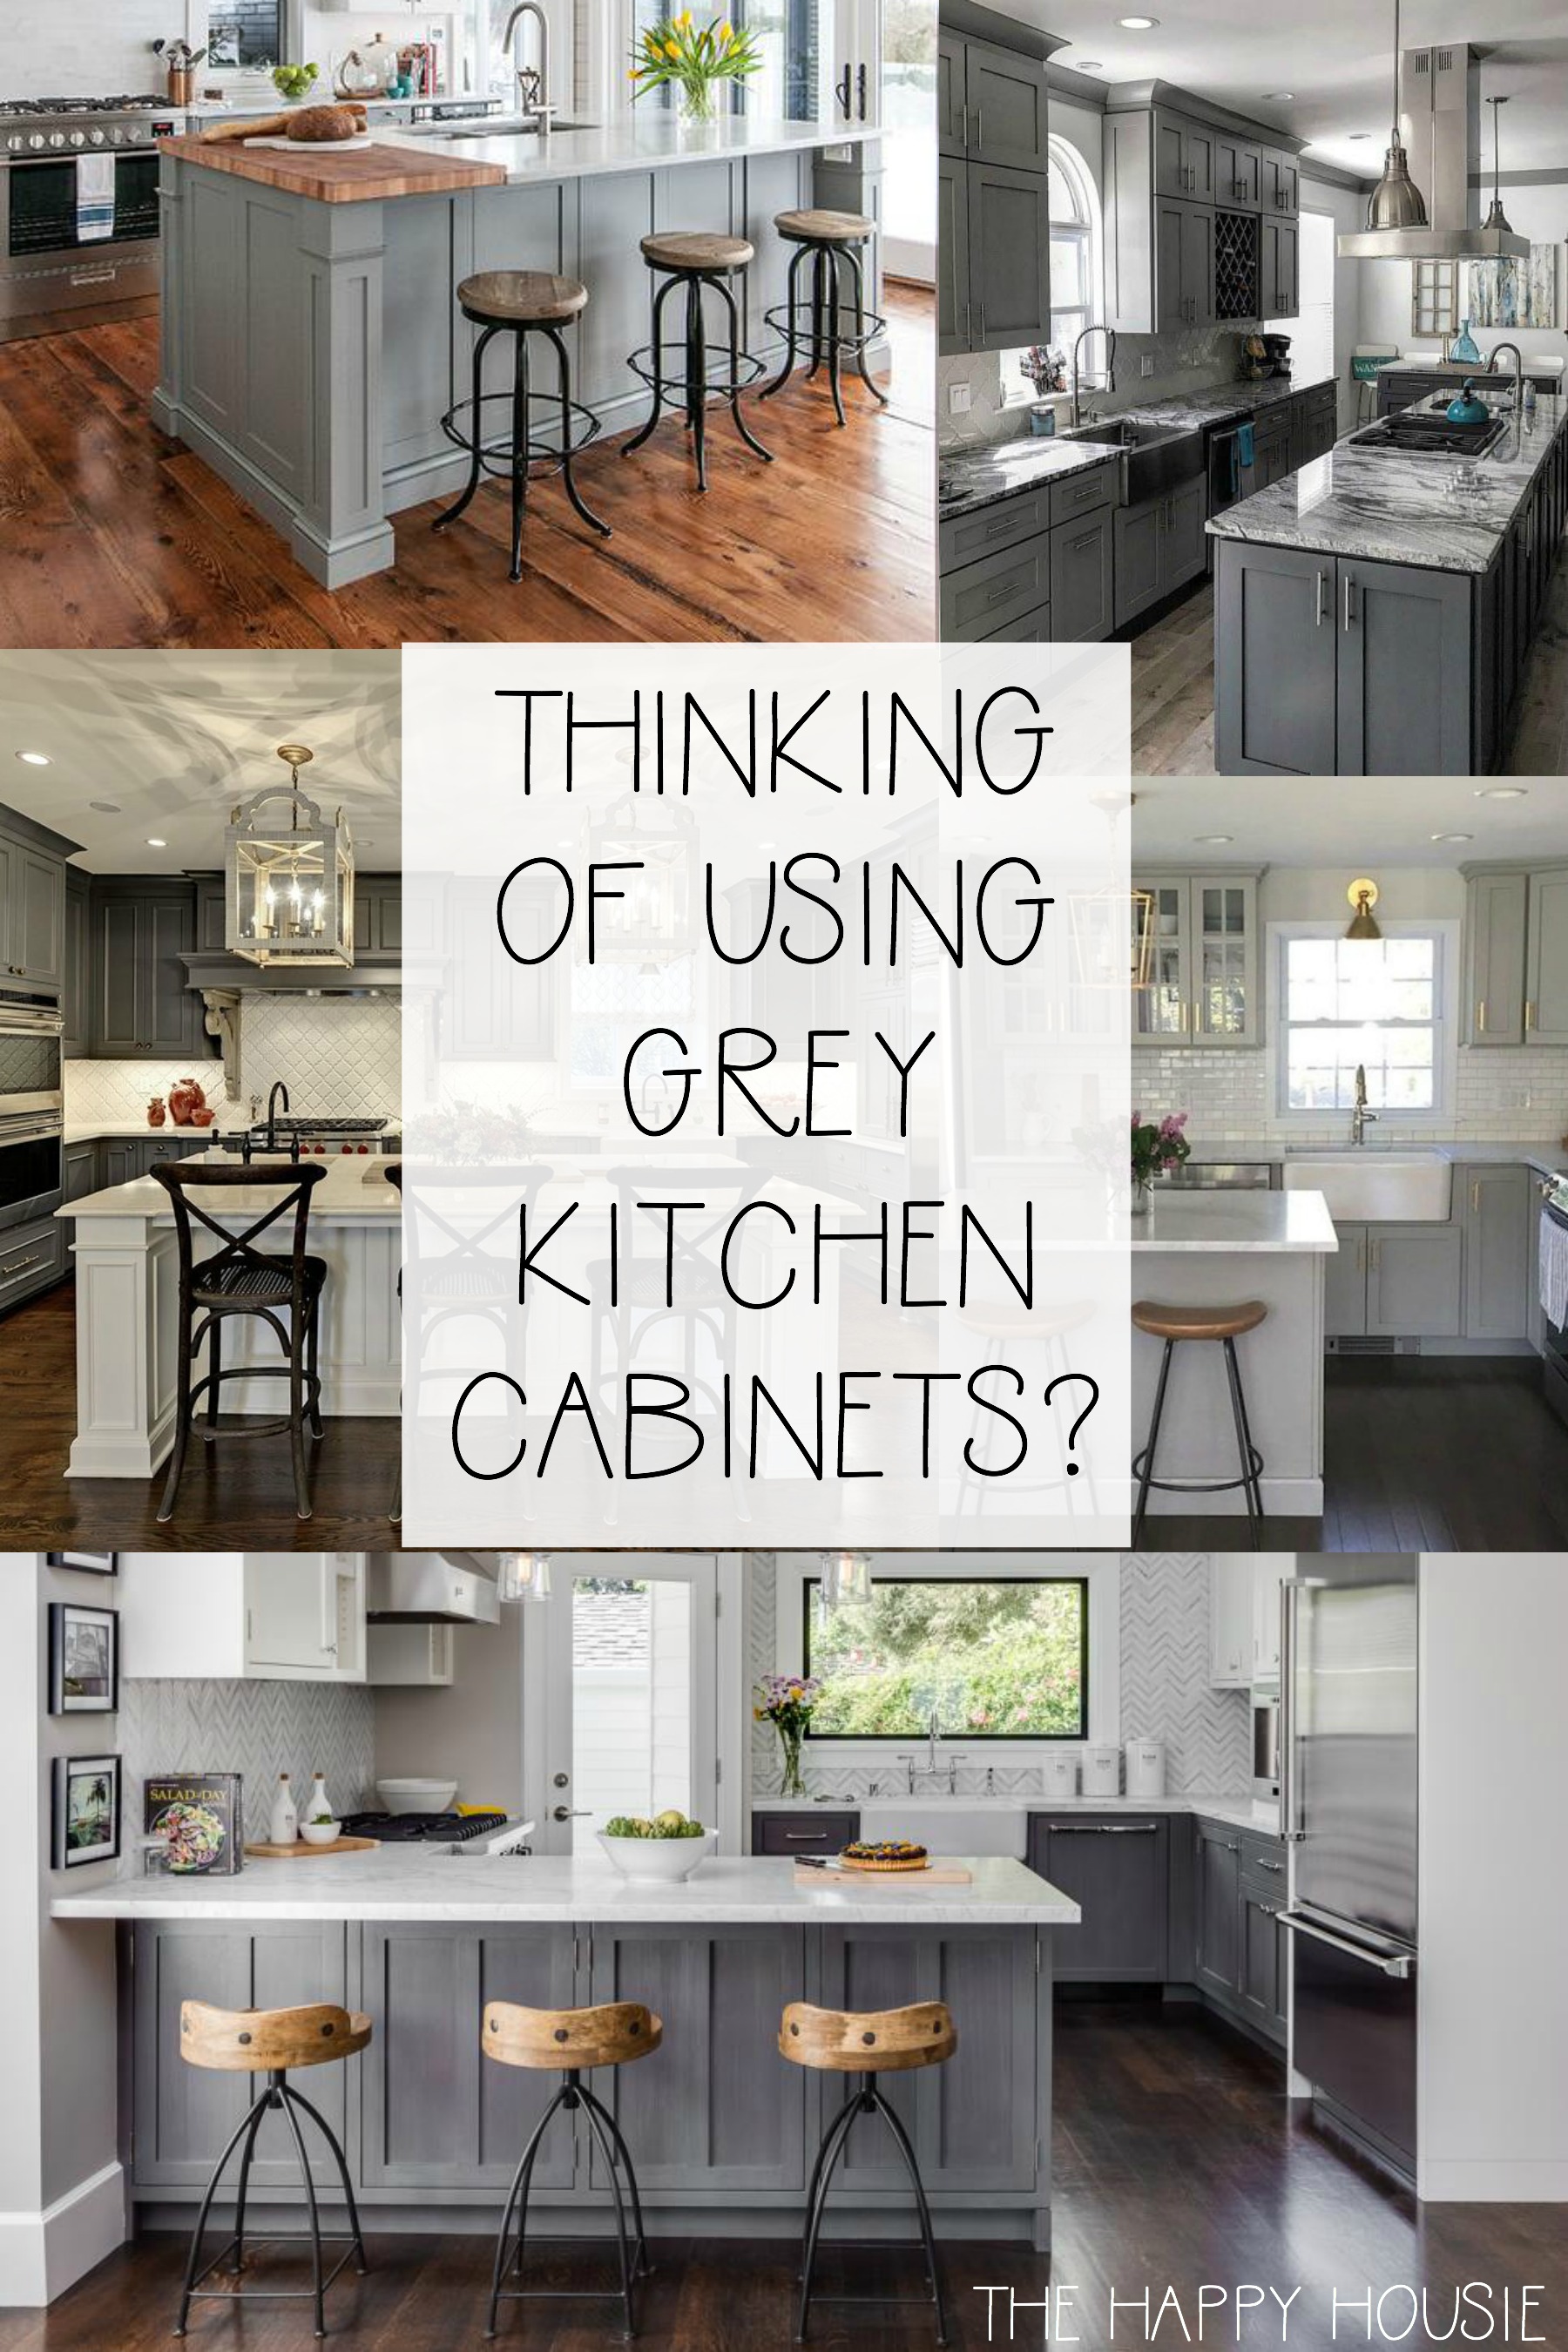 https://www.thehappyhousie.com/wp-content/uploads/2019/05/thinking-of-using-grey-kitchen-cabinets-here-is-some-inspiration.jpg